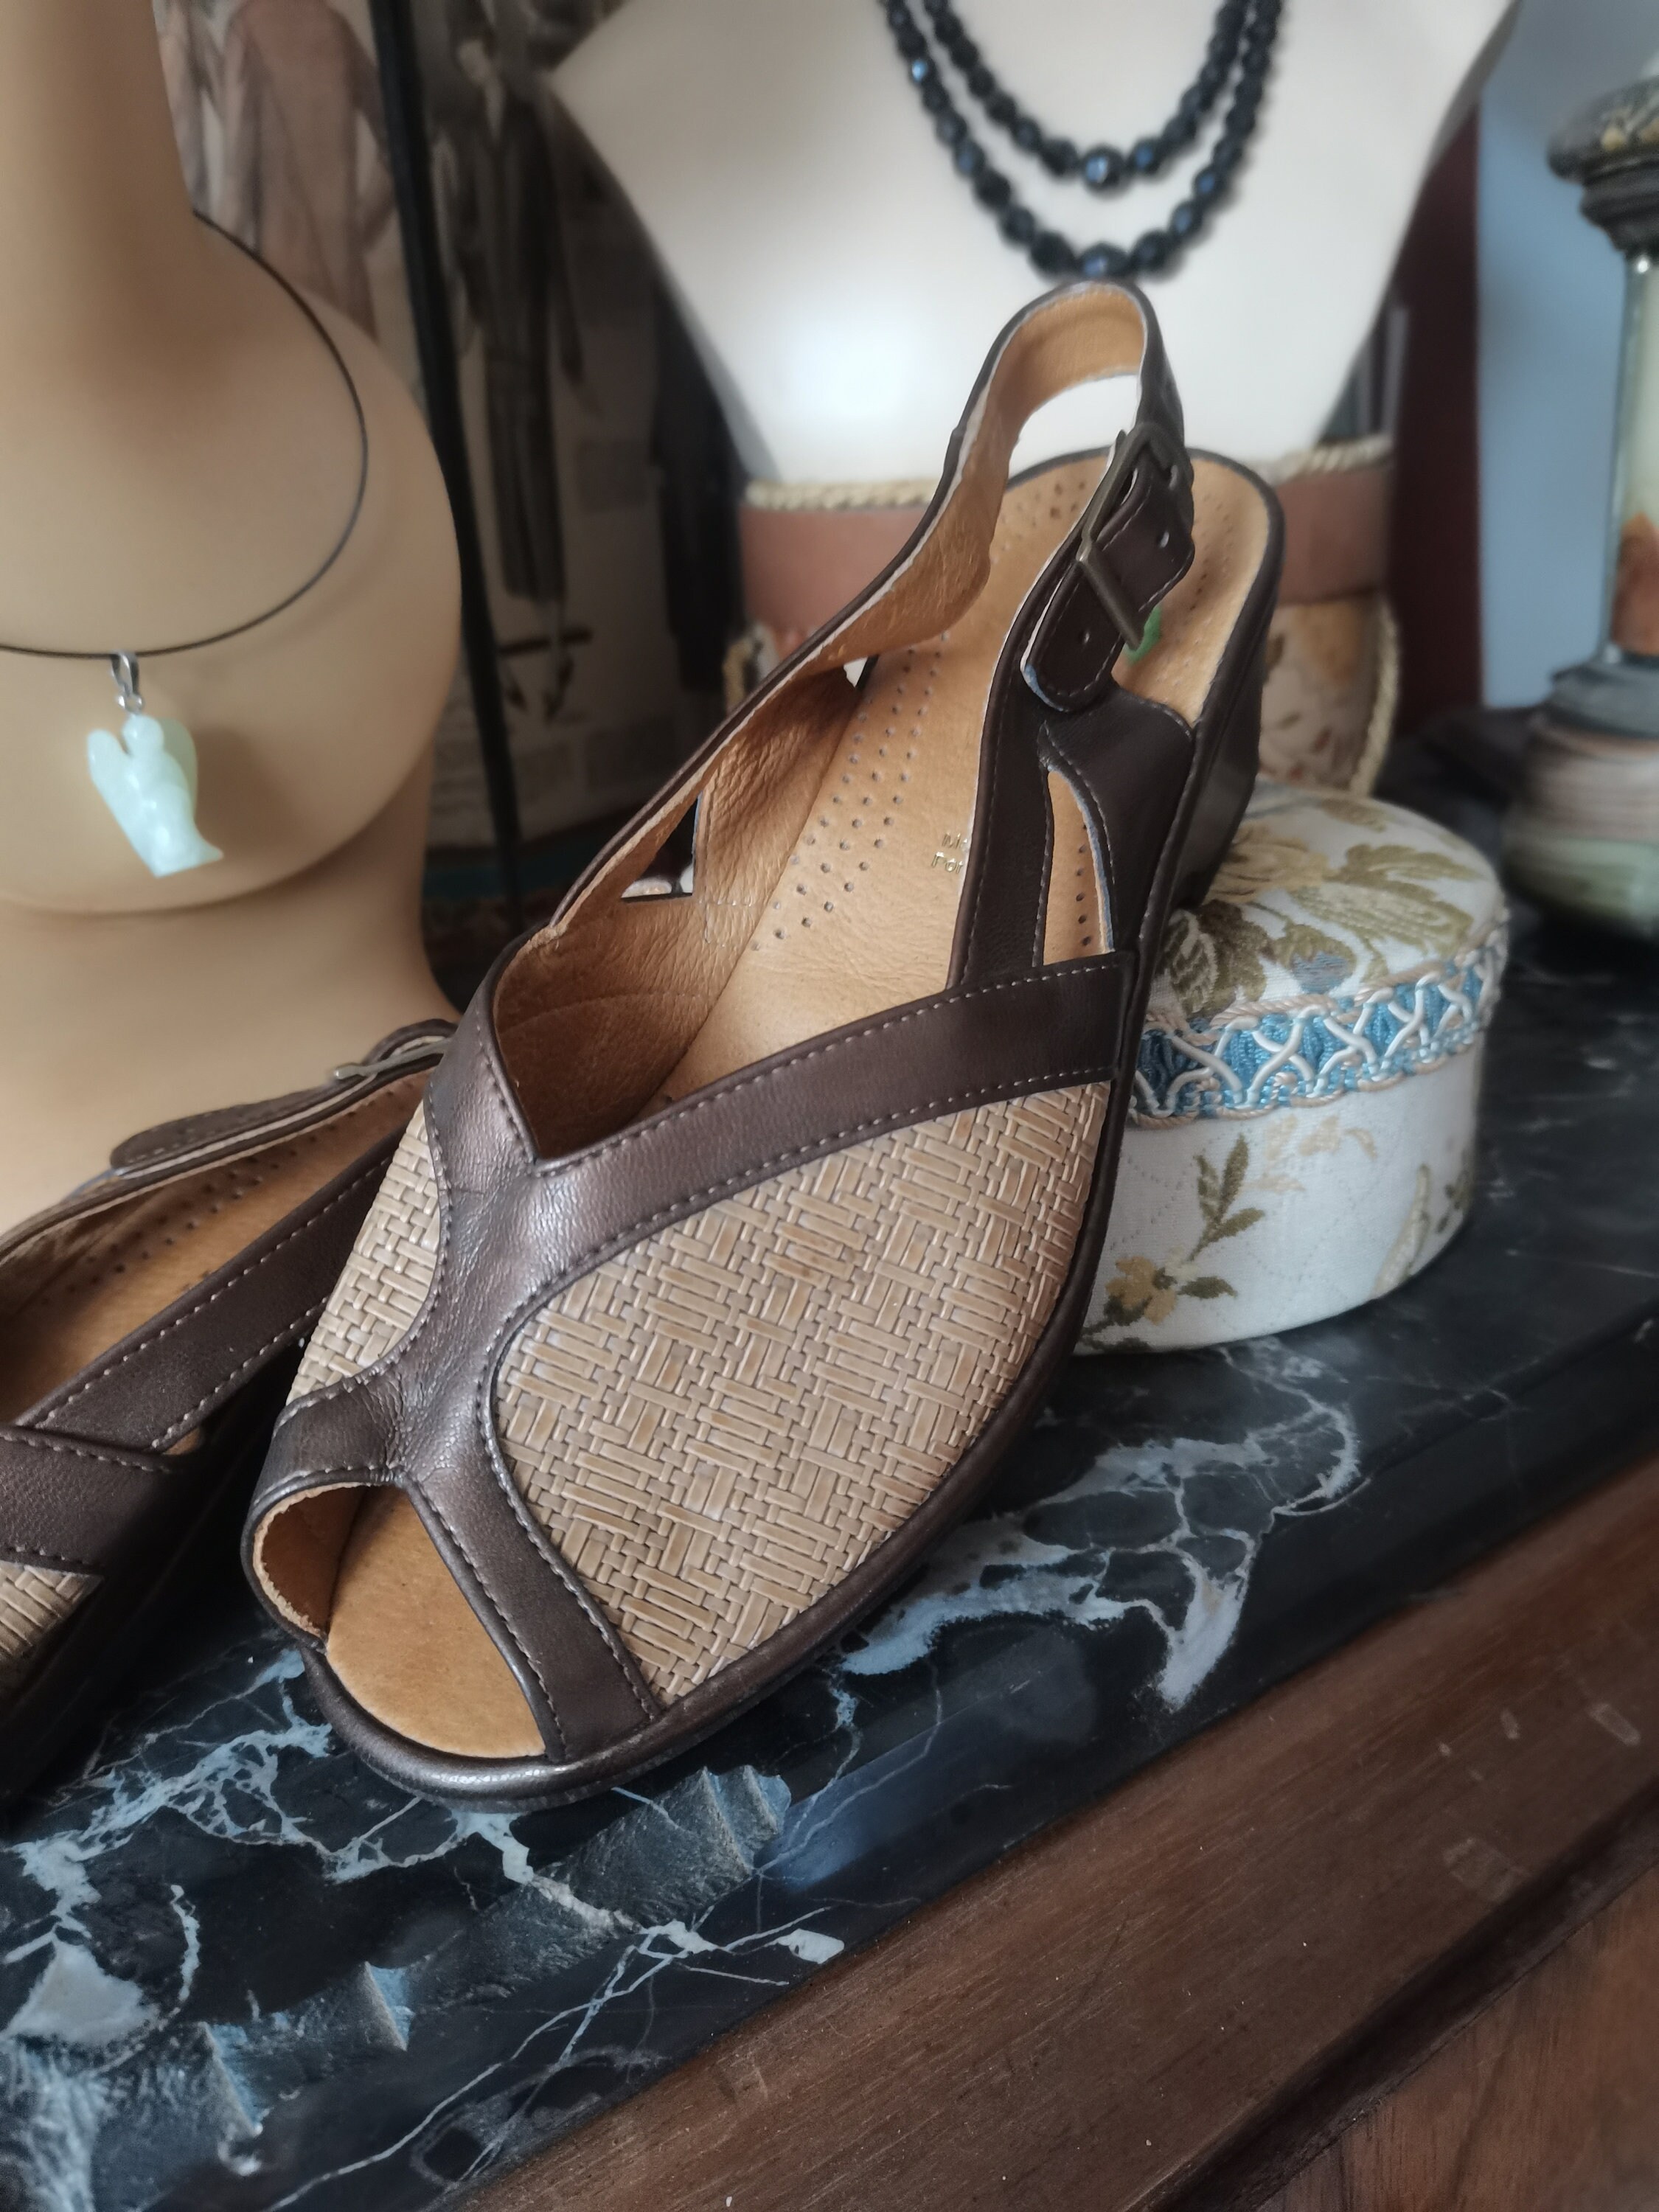 Vintage Does 1940s 1950s Style Shoes Wedges FR37 UK4 US6 Dead 